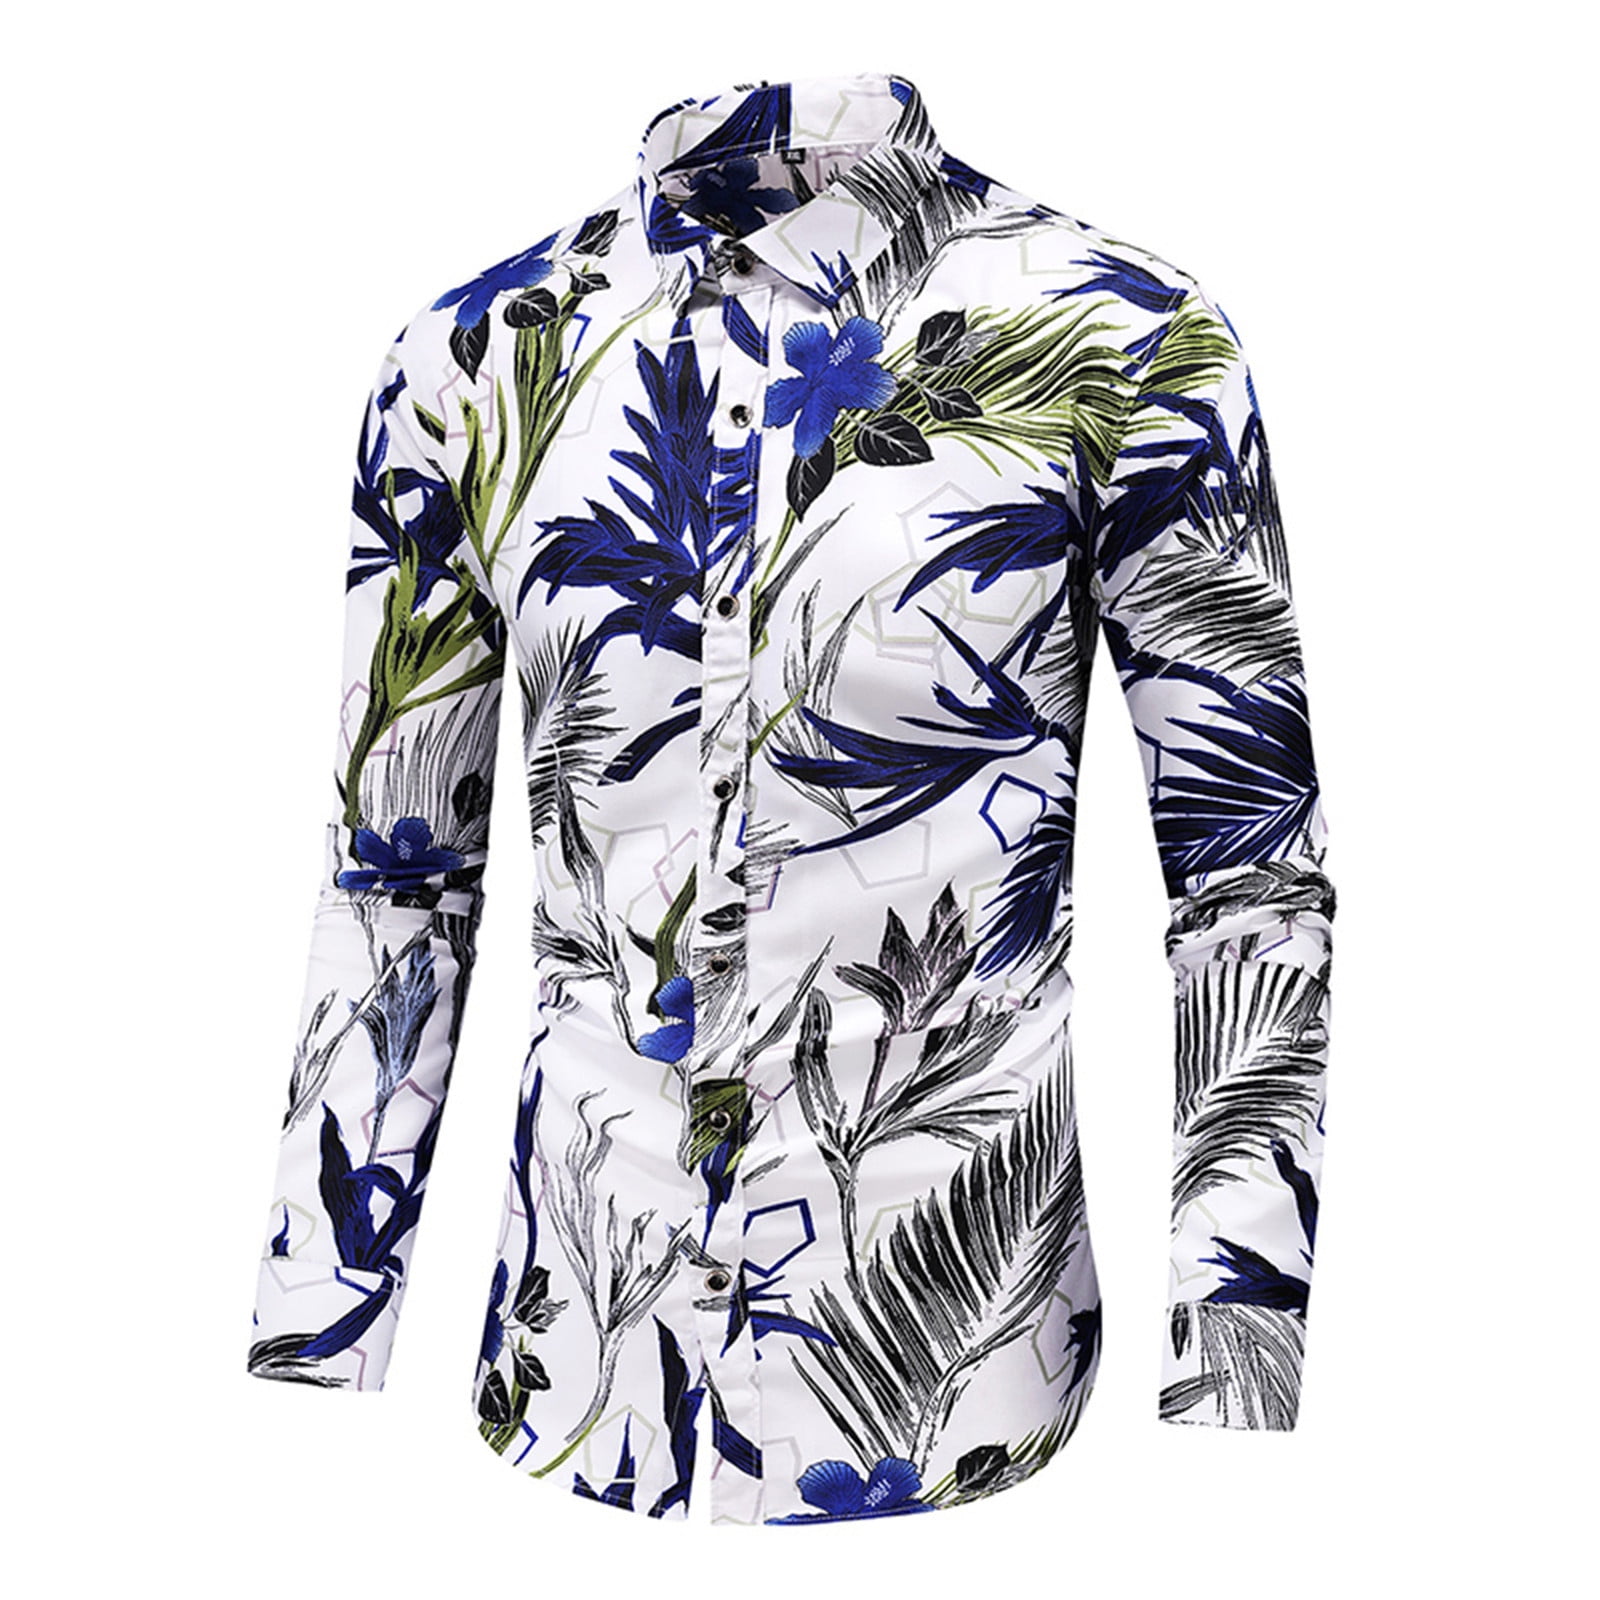 Coolred-Men Relaxed Fashion Lapel Casual Print Long Sleeve Shirt